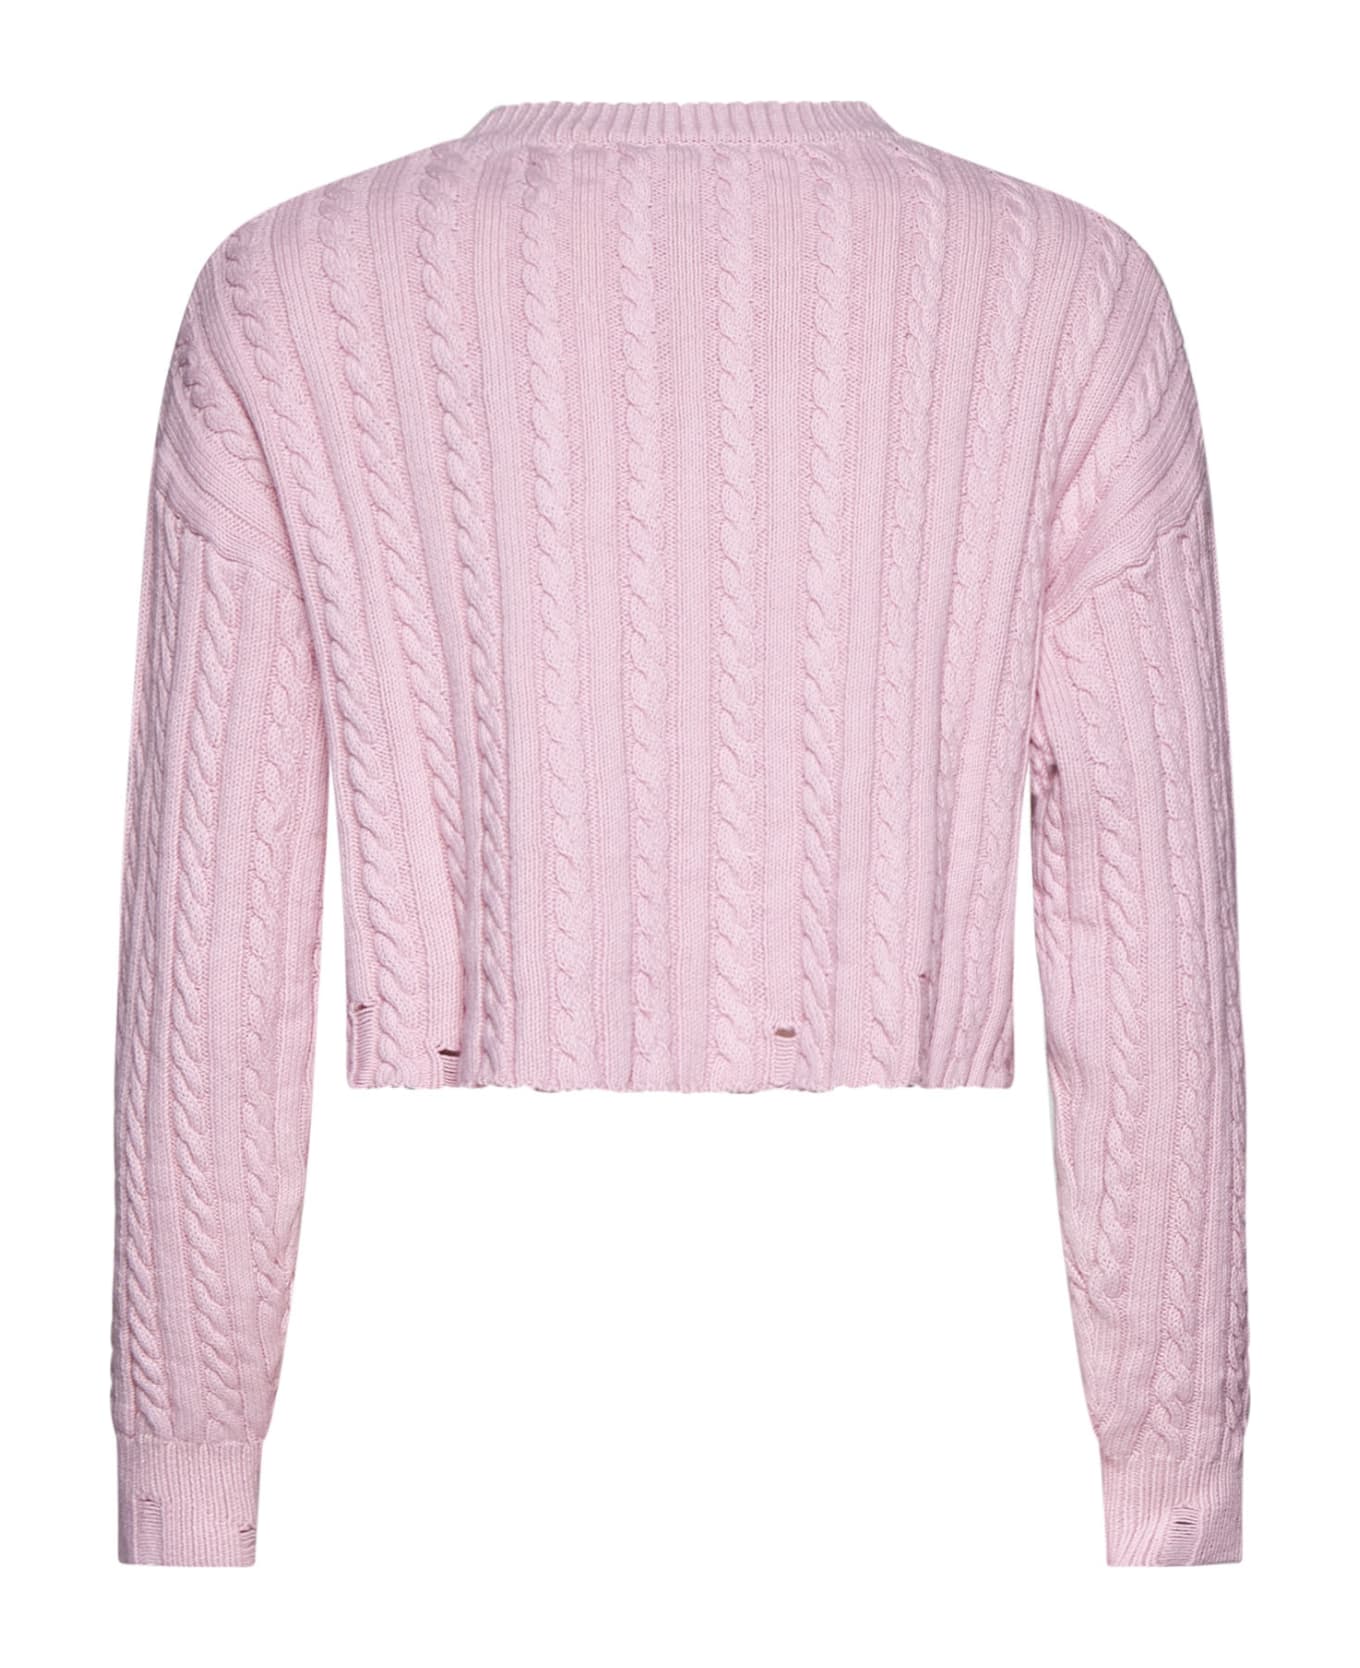 Hope Sweater - Pink